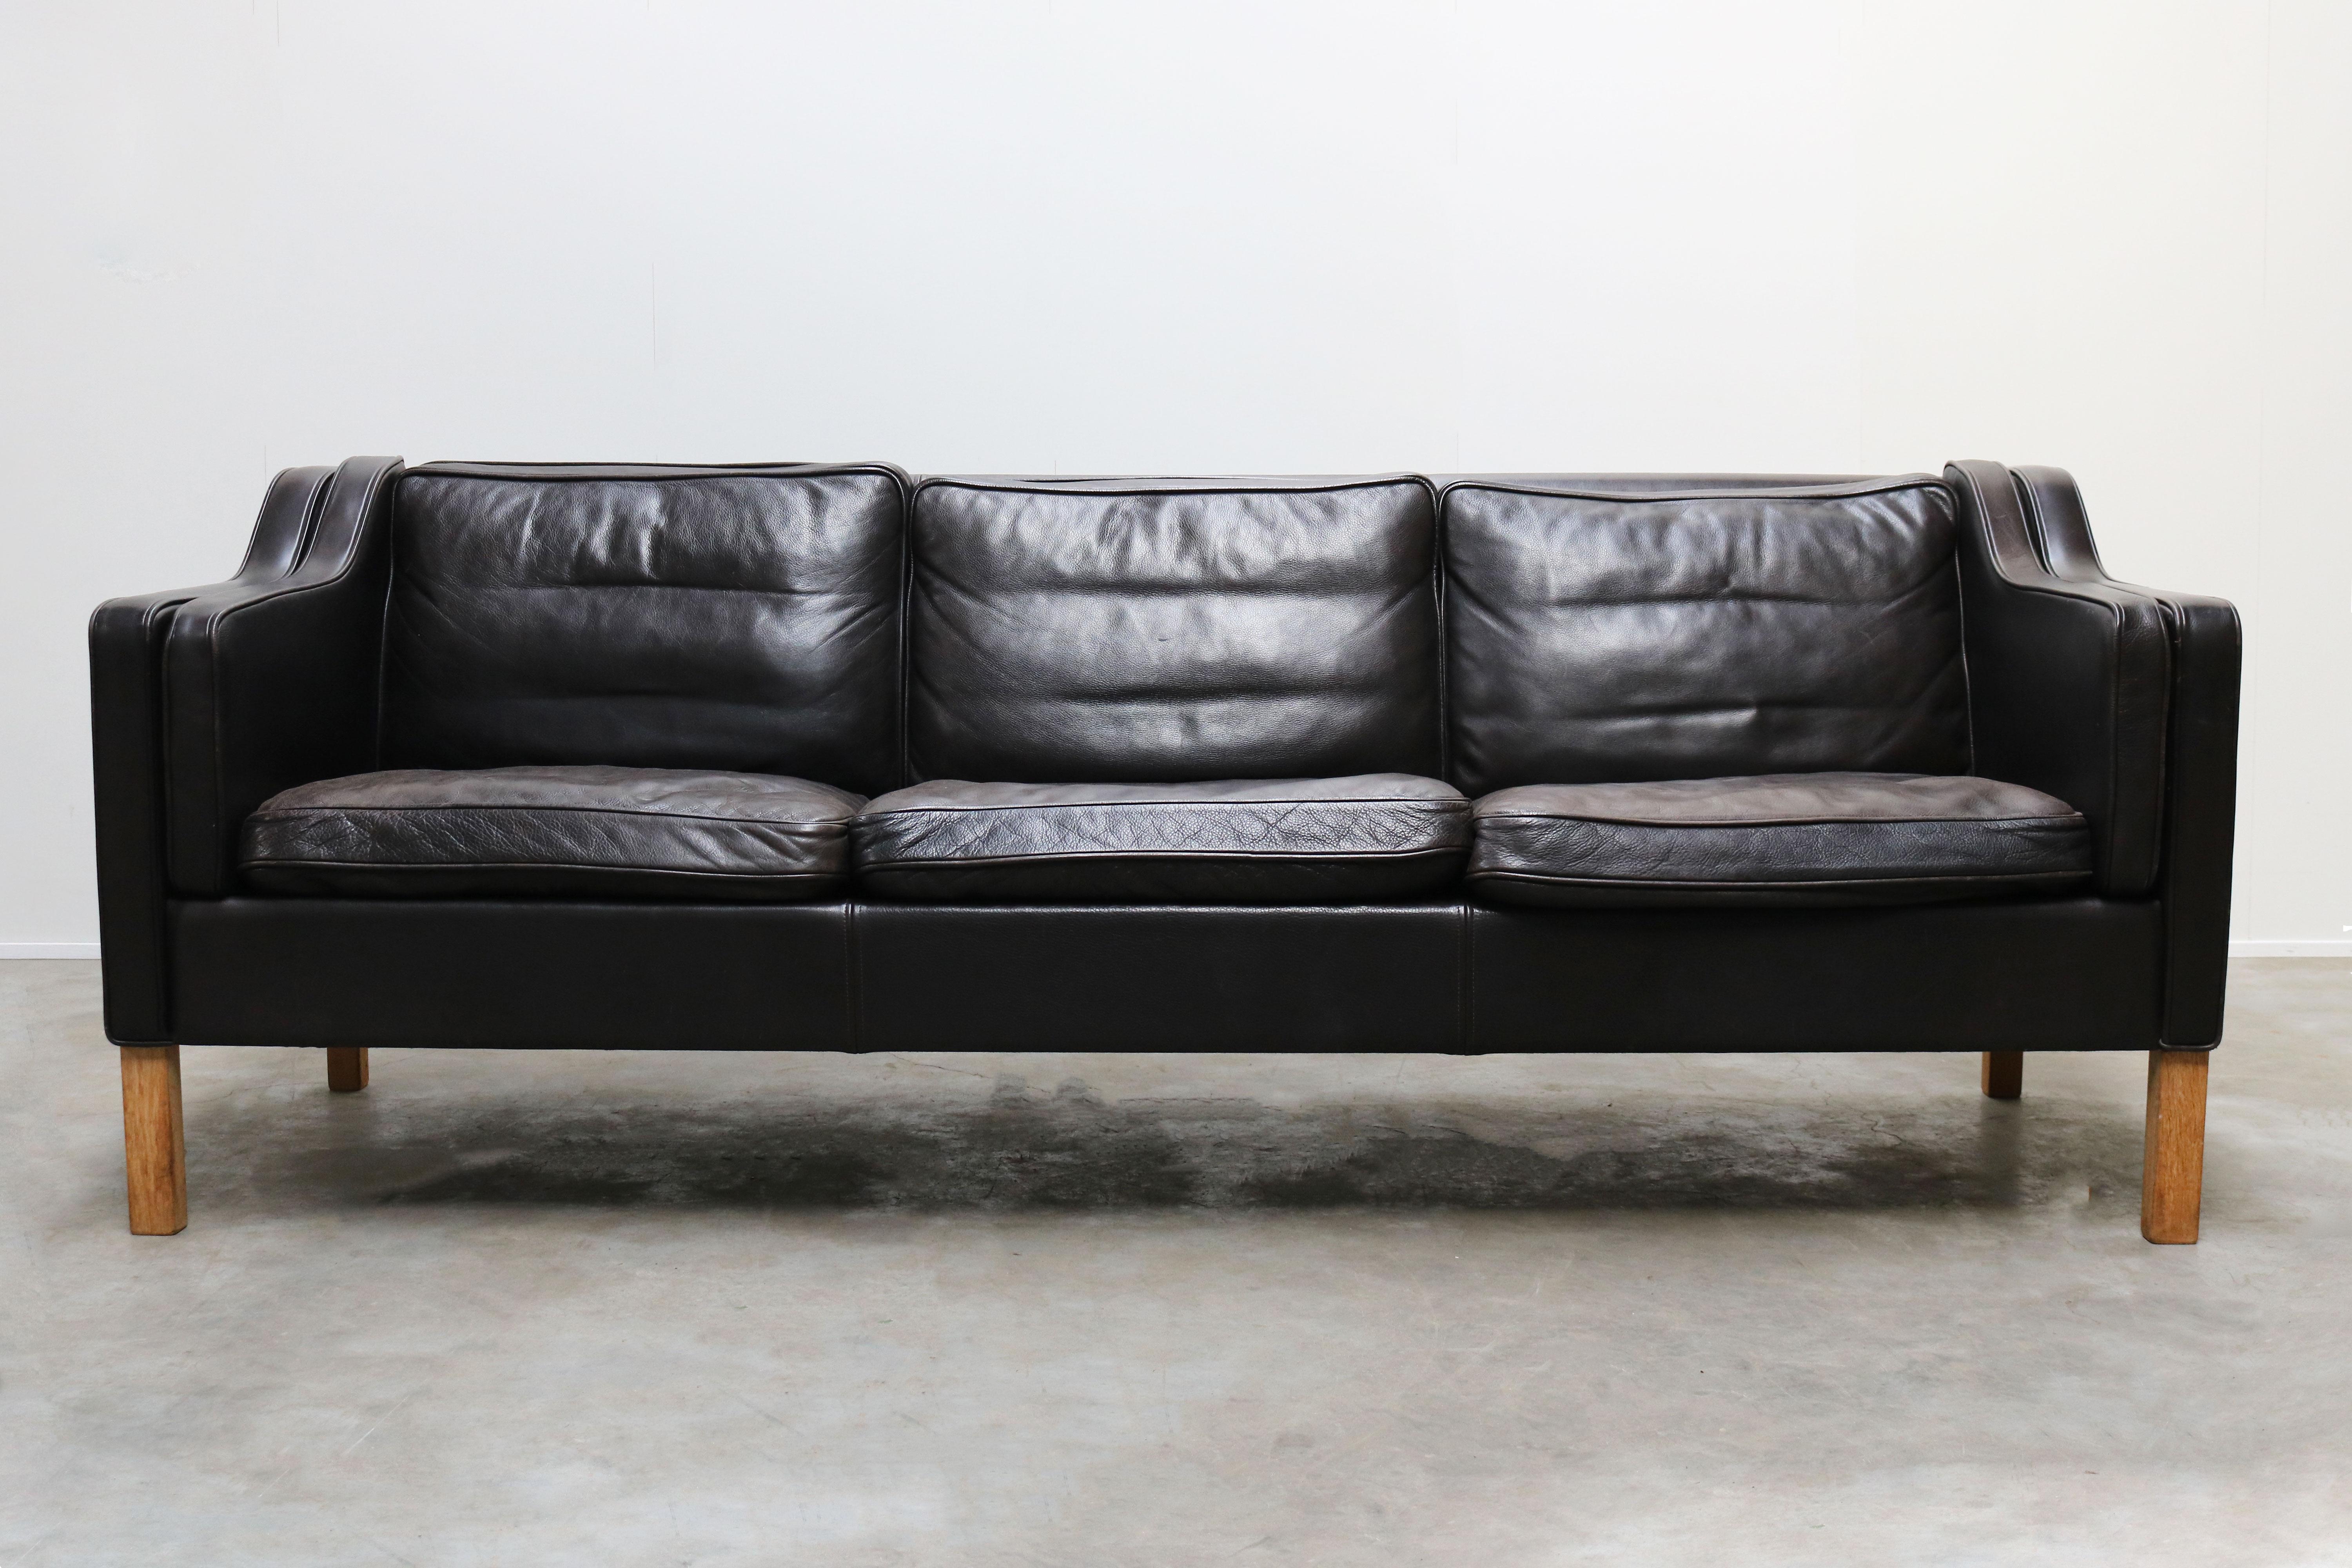 Vintage Black Leather Sofa 2213 by Børge Mogensen for Fredericia 1960 Three-Seat 4